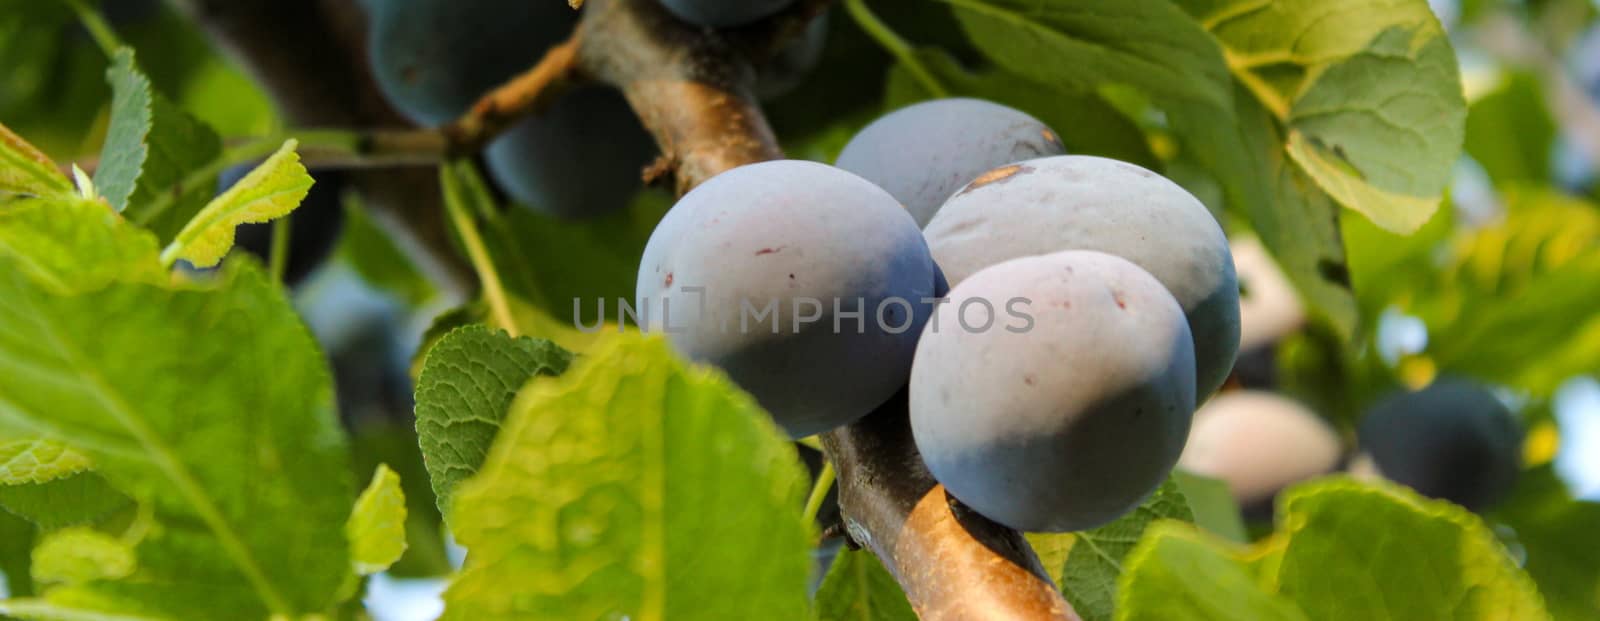 Banner. Ripe plums among the leaves on the branch. by mahirrov